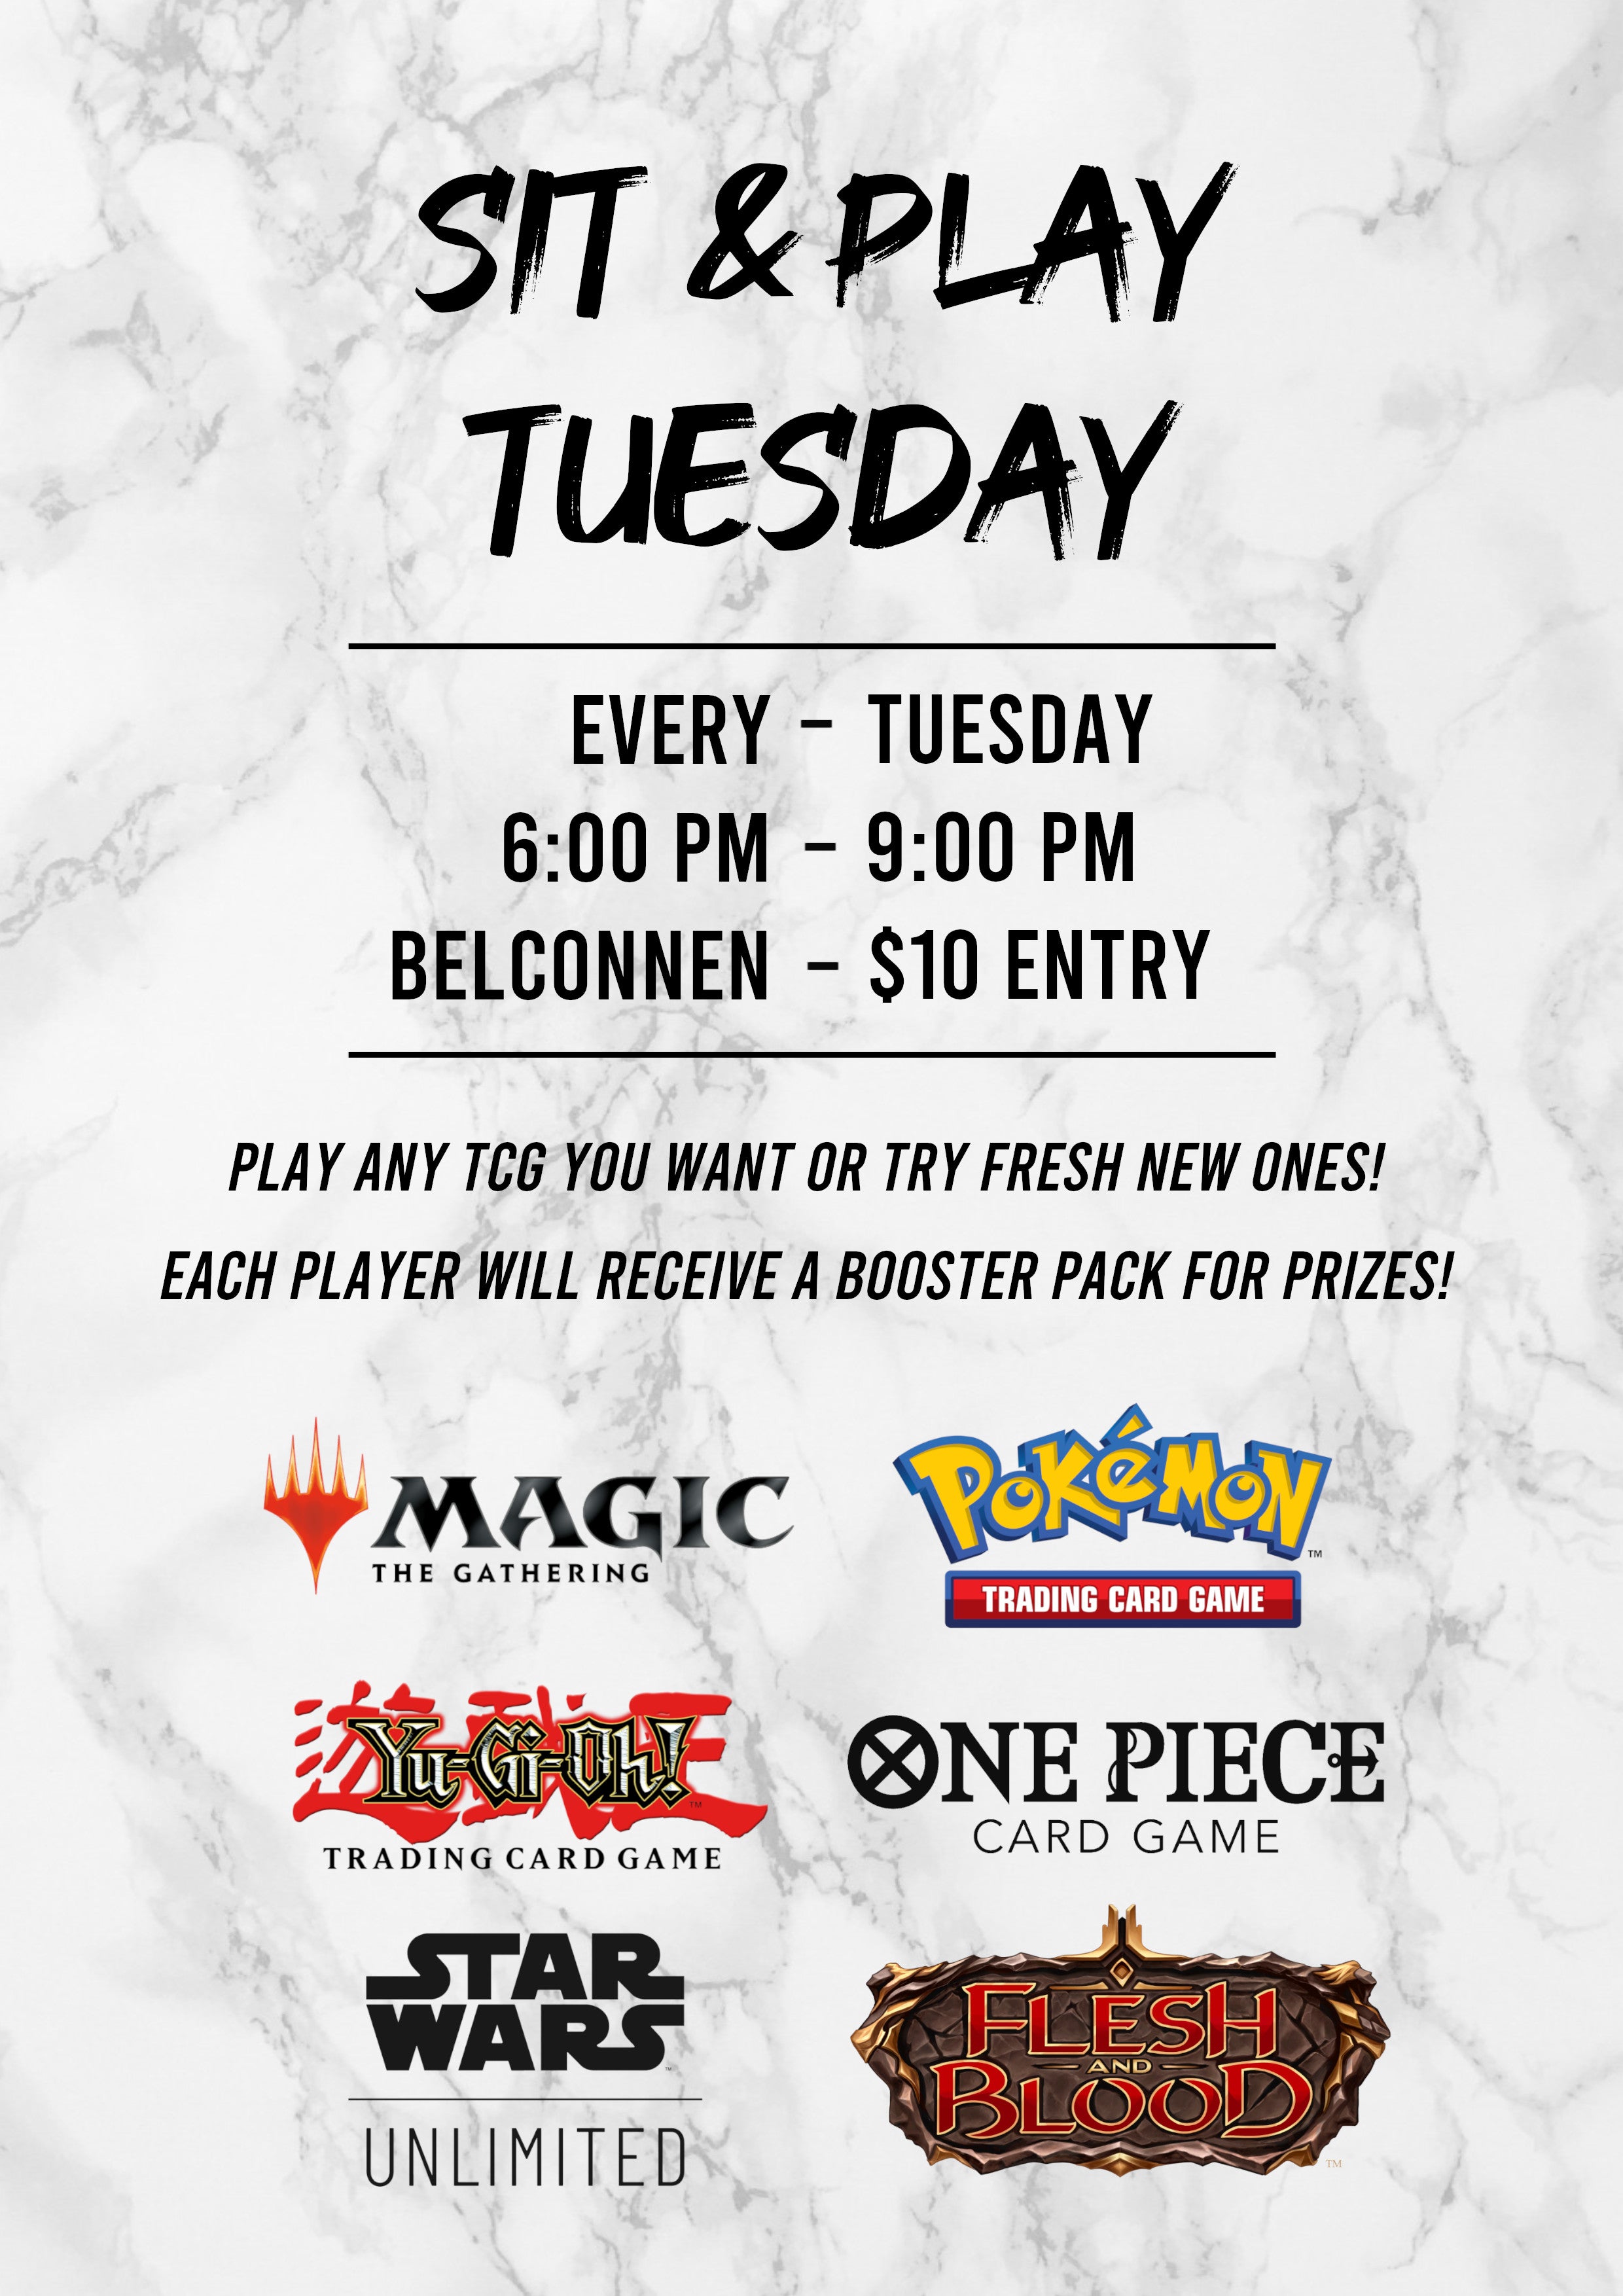 Weekly TCG Sit & Play Tuesday - Belconnen Only